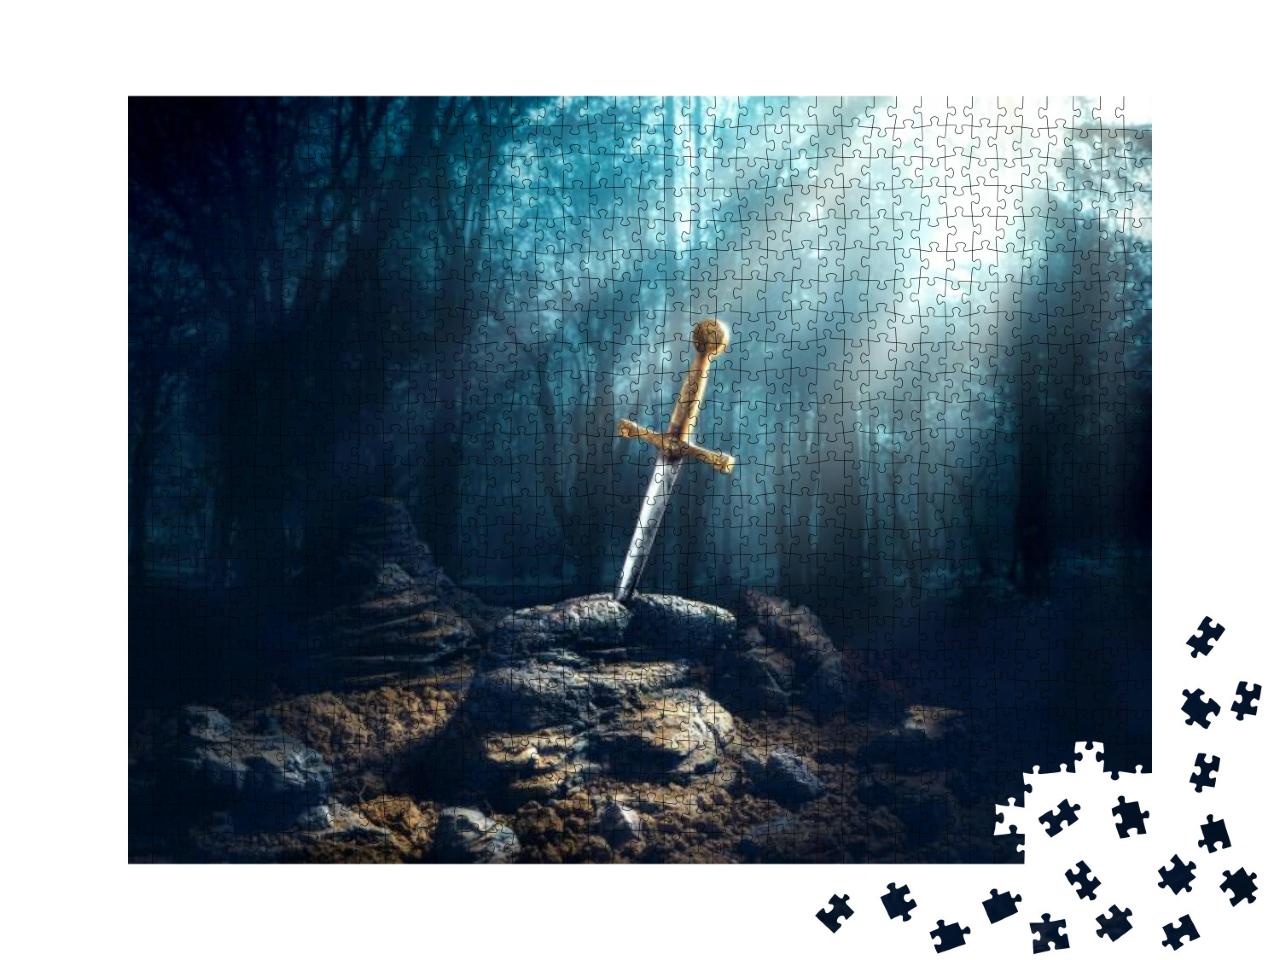 High Contrast Image of Excalibur, Sword in the Stone with... Jigsaw Puzzle with 1000 pieces